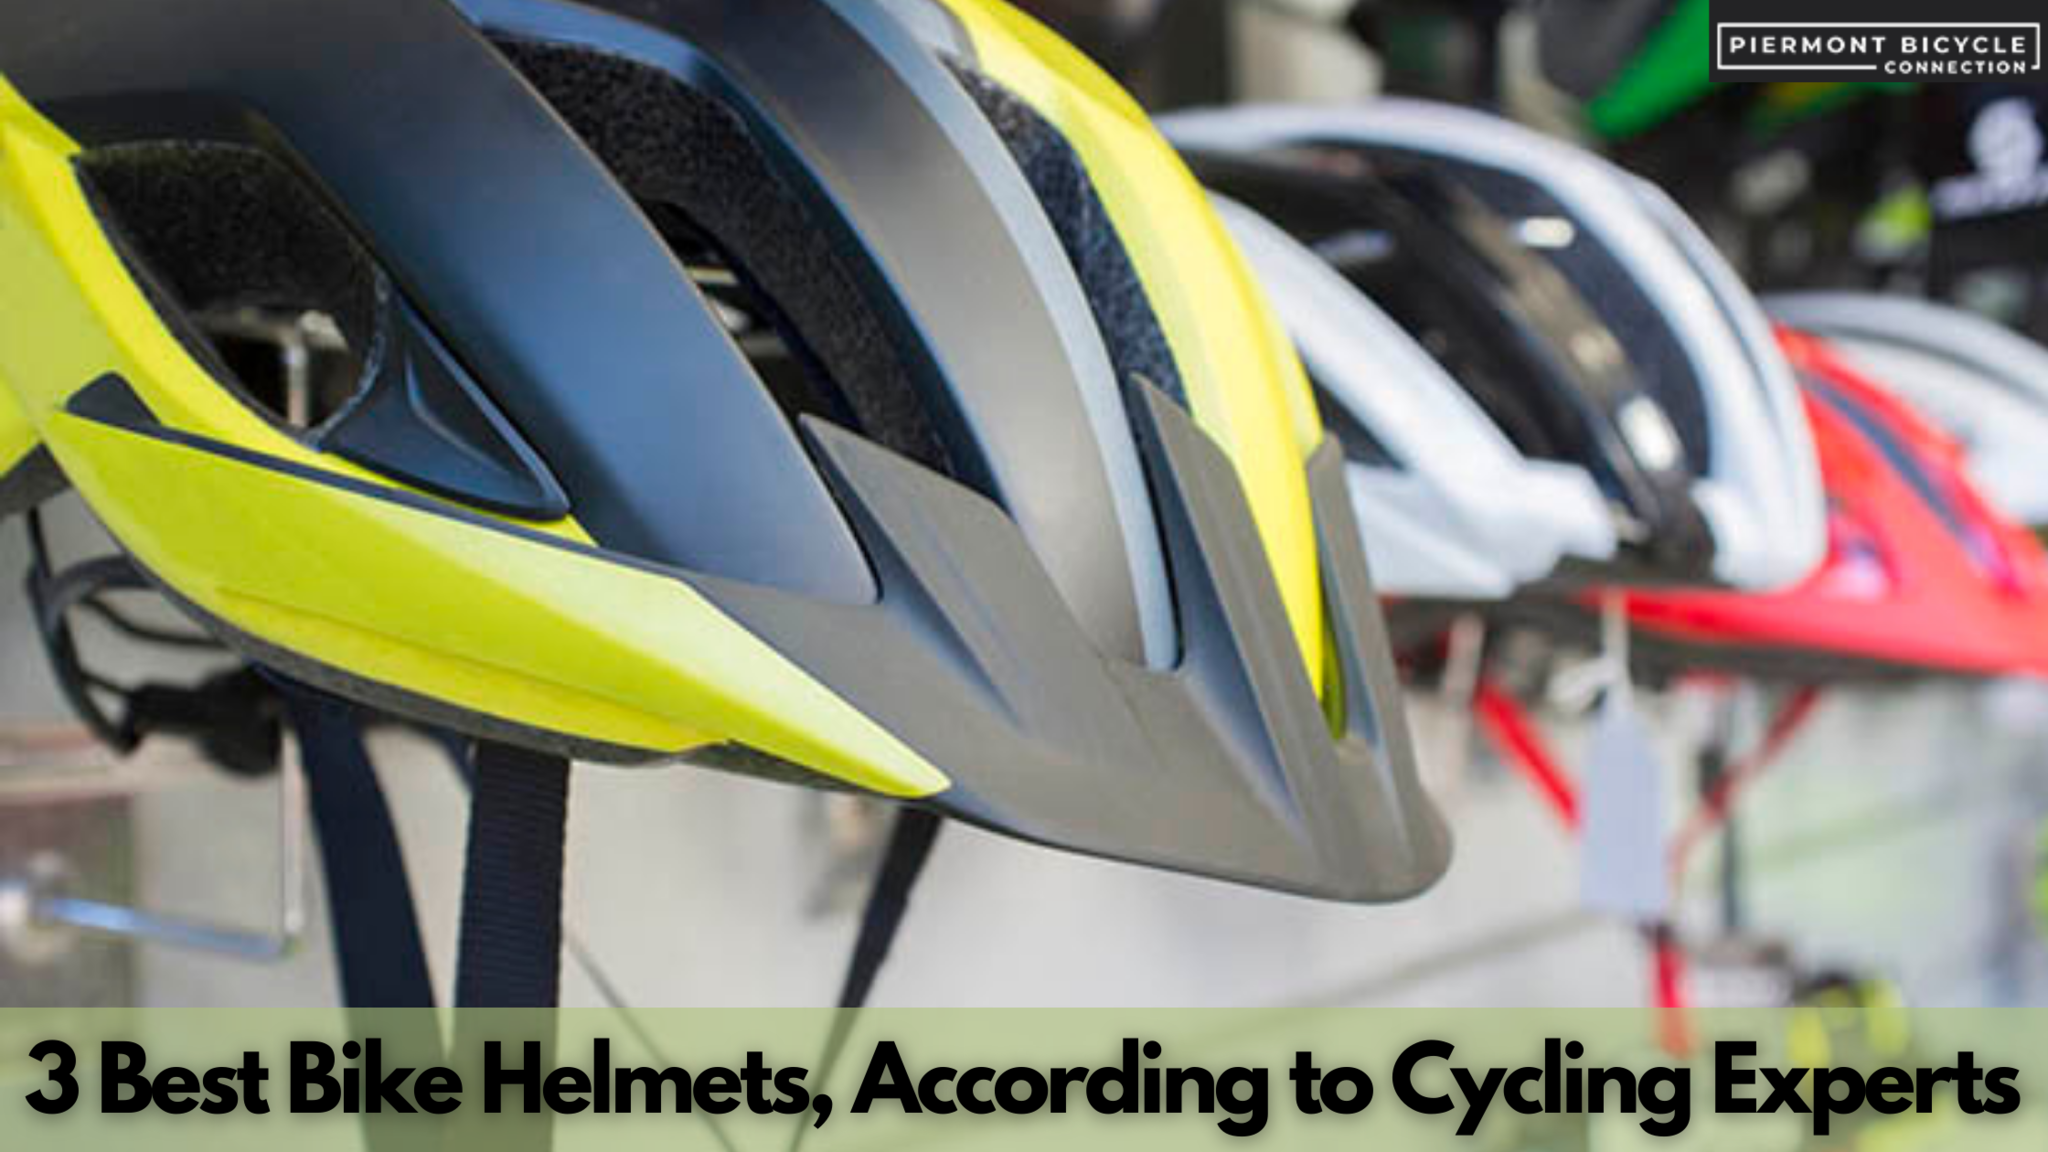 3 Best Bike Helmets, According to Cycling Experts